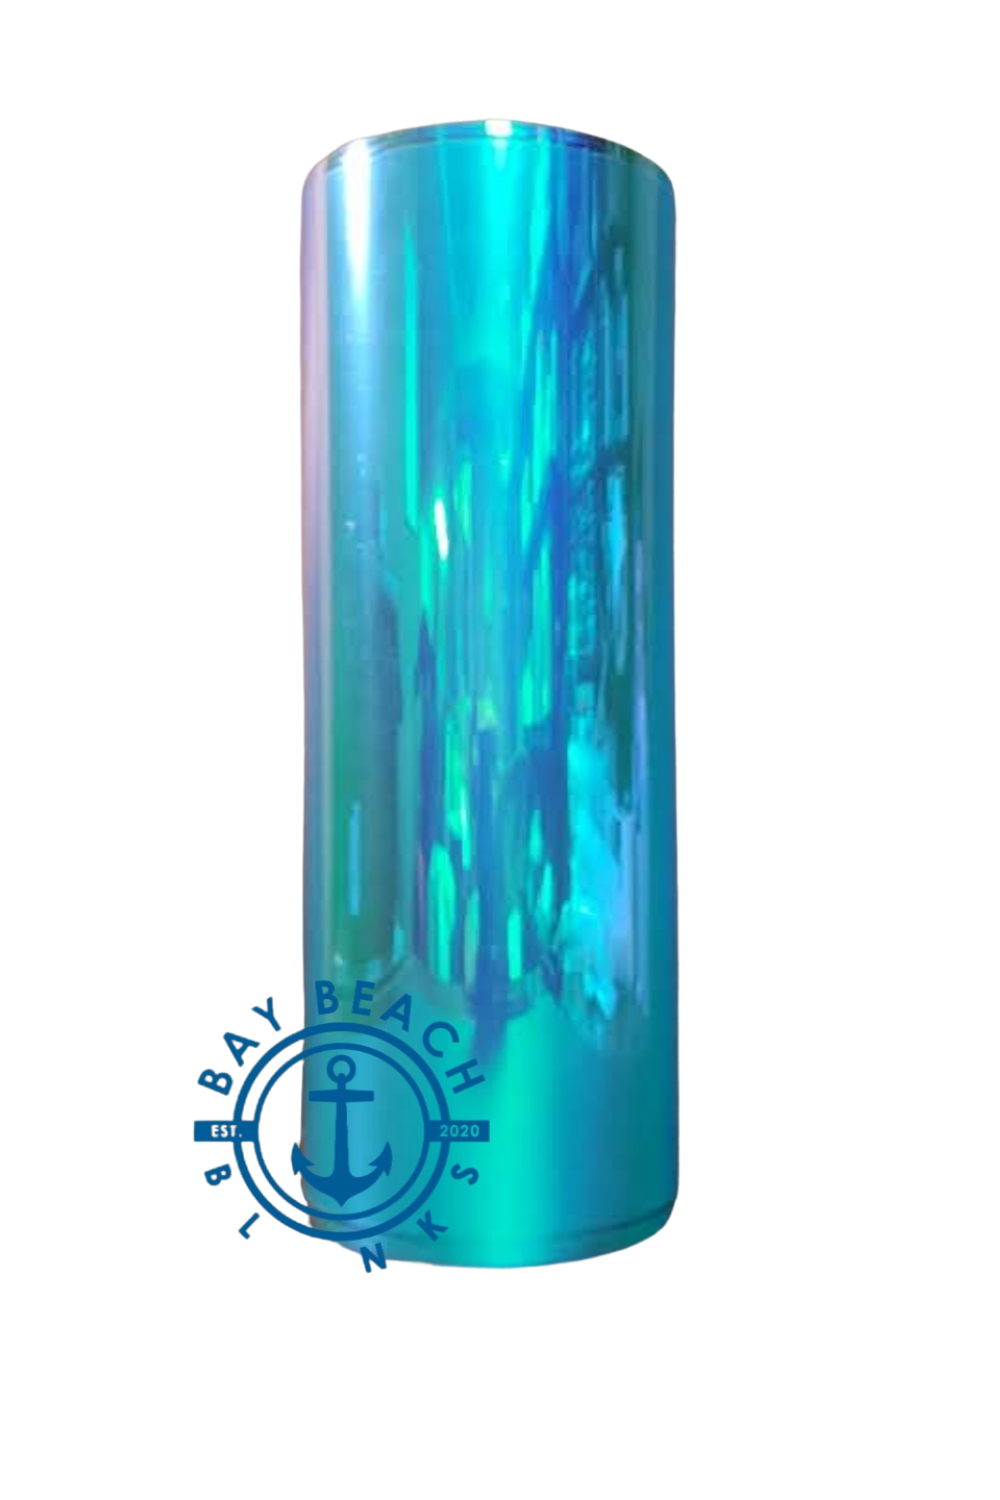 Opal Blue Green  -quailty adhesive vinyl, sticker crafting vinyl, holographic, mirror, fish scale, tumbler makers, Starbucks cold cup vinyl, Crystalac tumblers, travel cups, Epoxy tumbler makers, Niagara Falls Ontario Canada Craft supplies